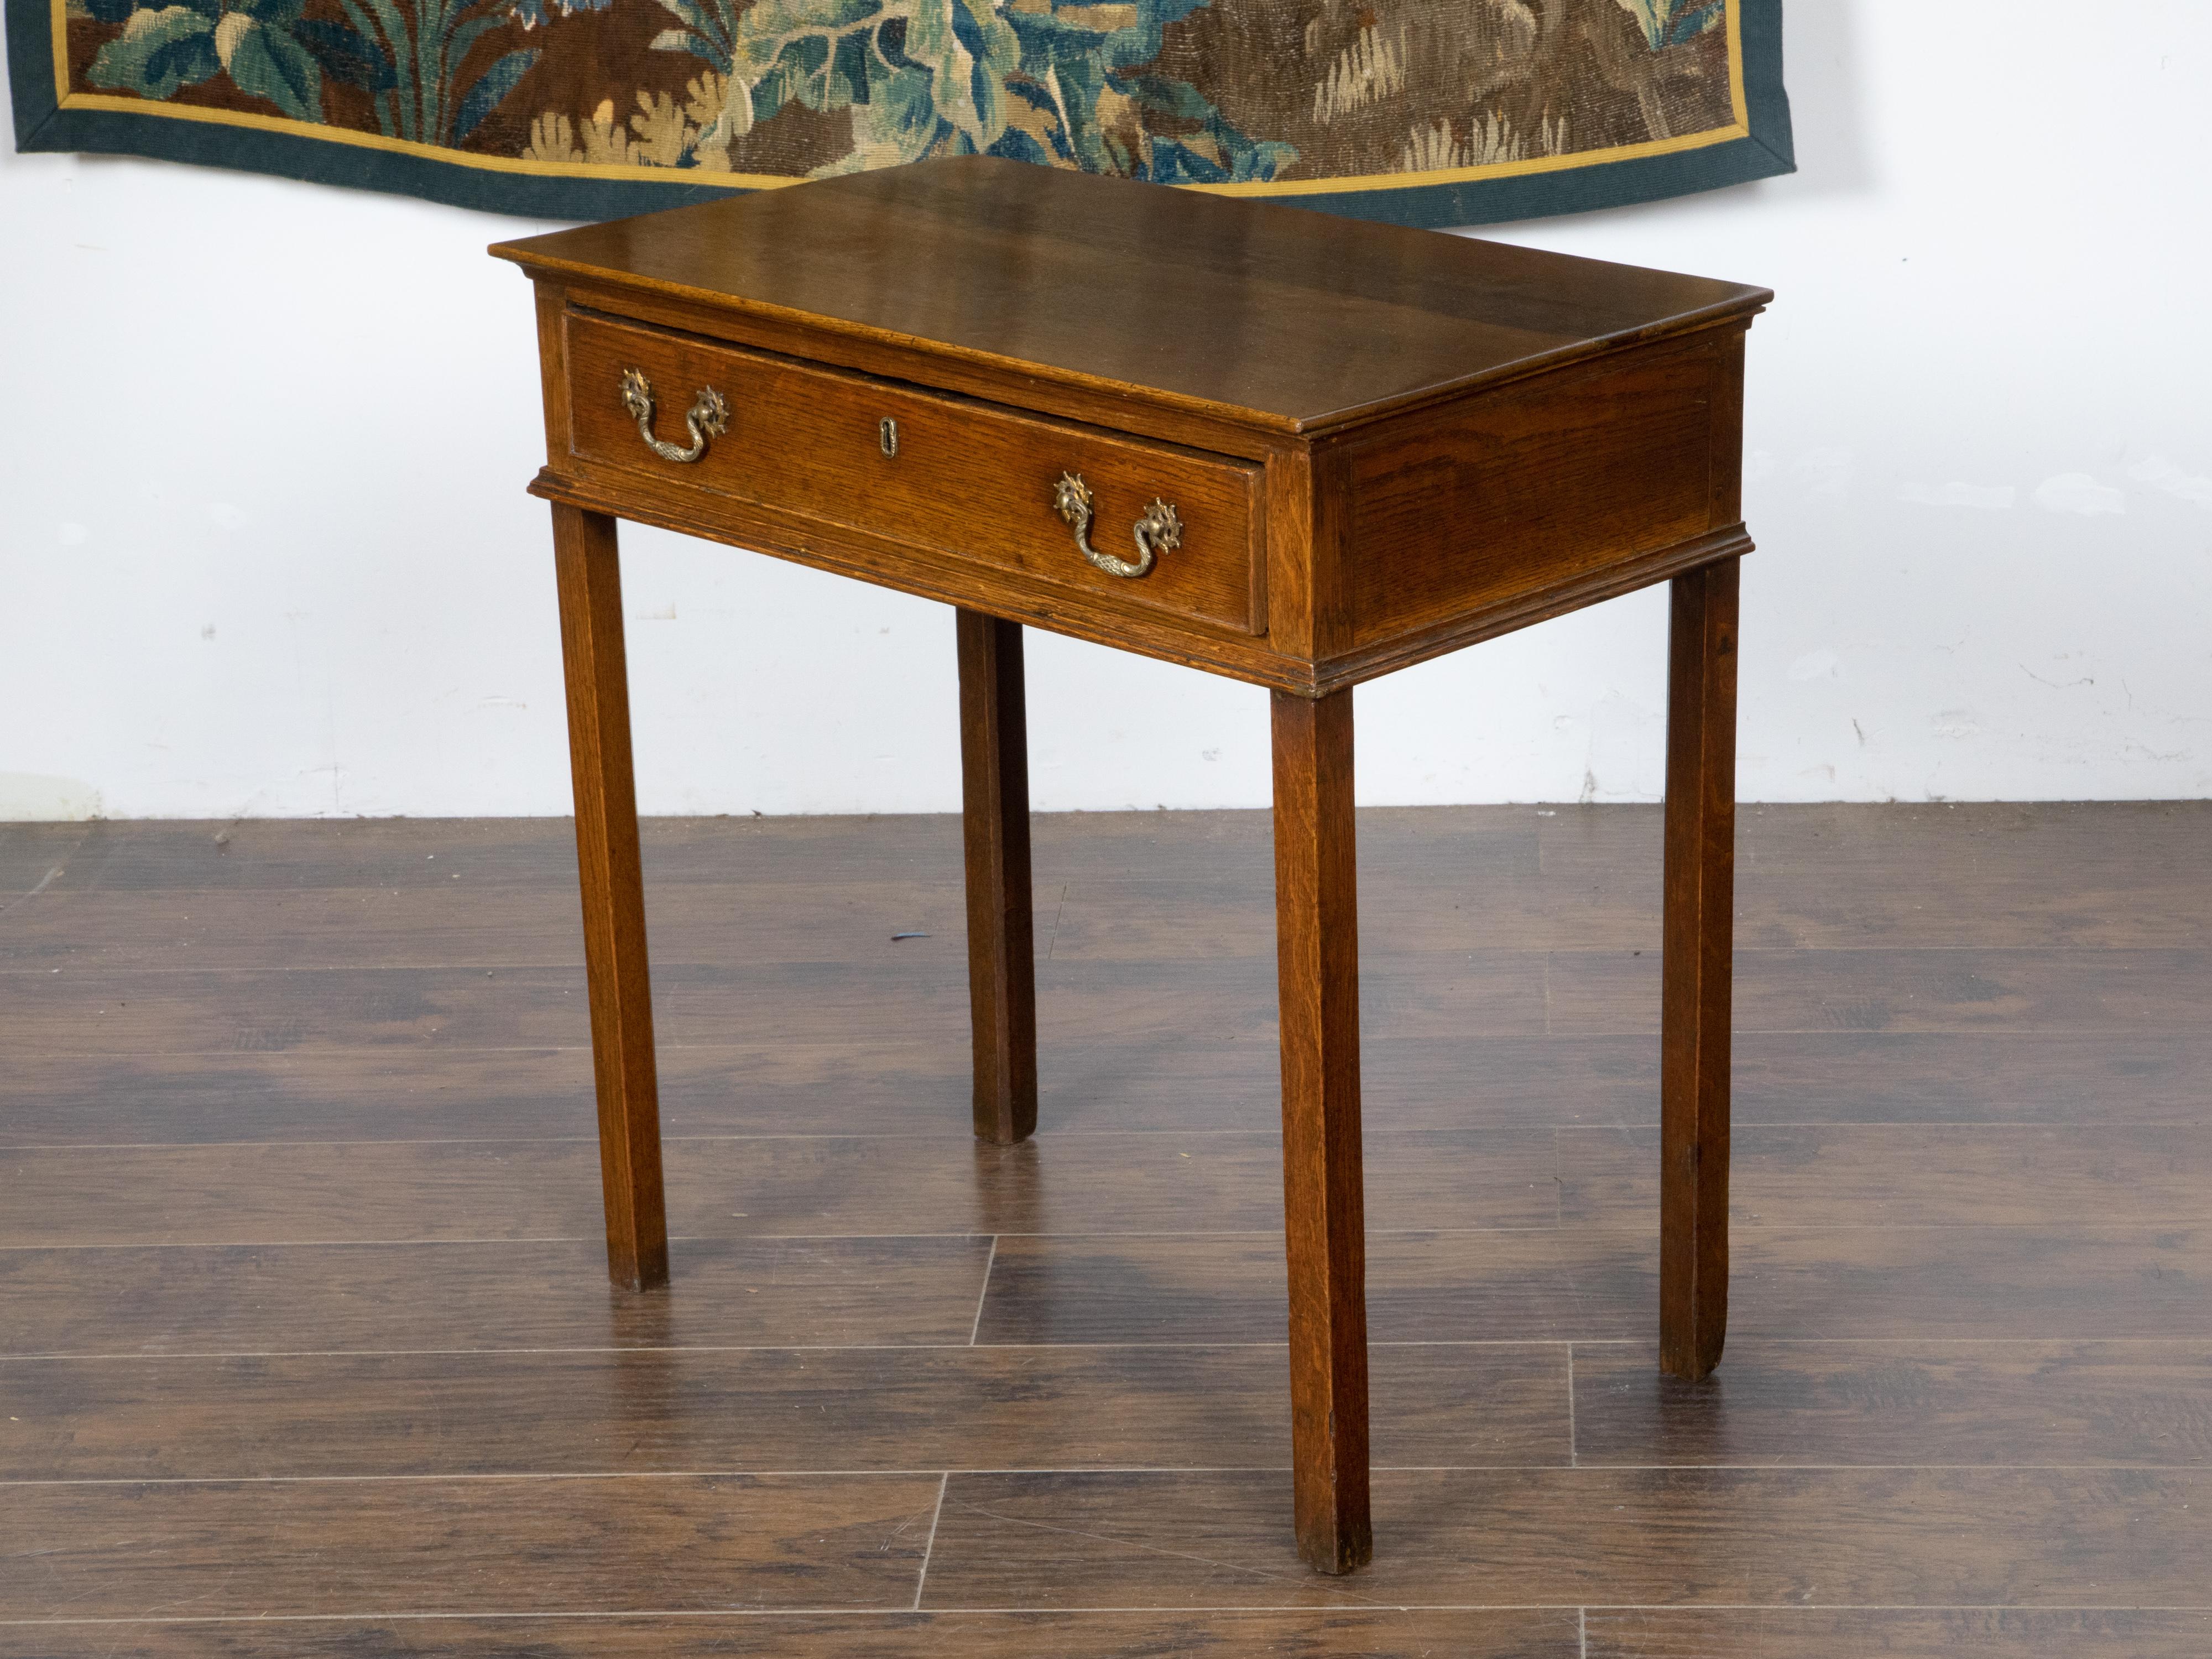 English Oak 1840s Side Table with Single Drawer and Ornate Hardware For Sale 3